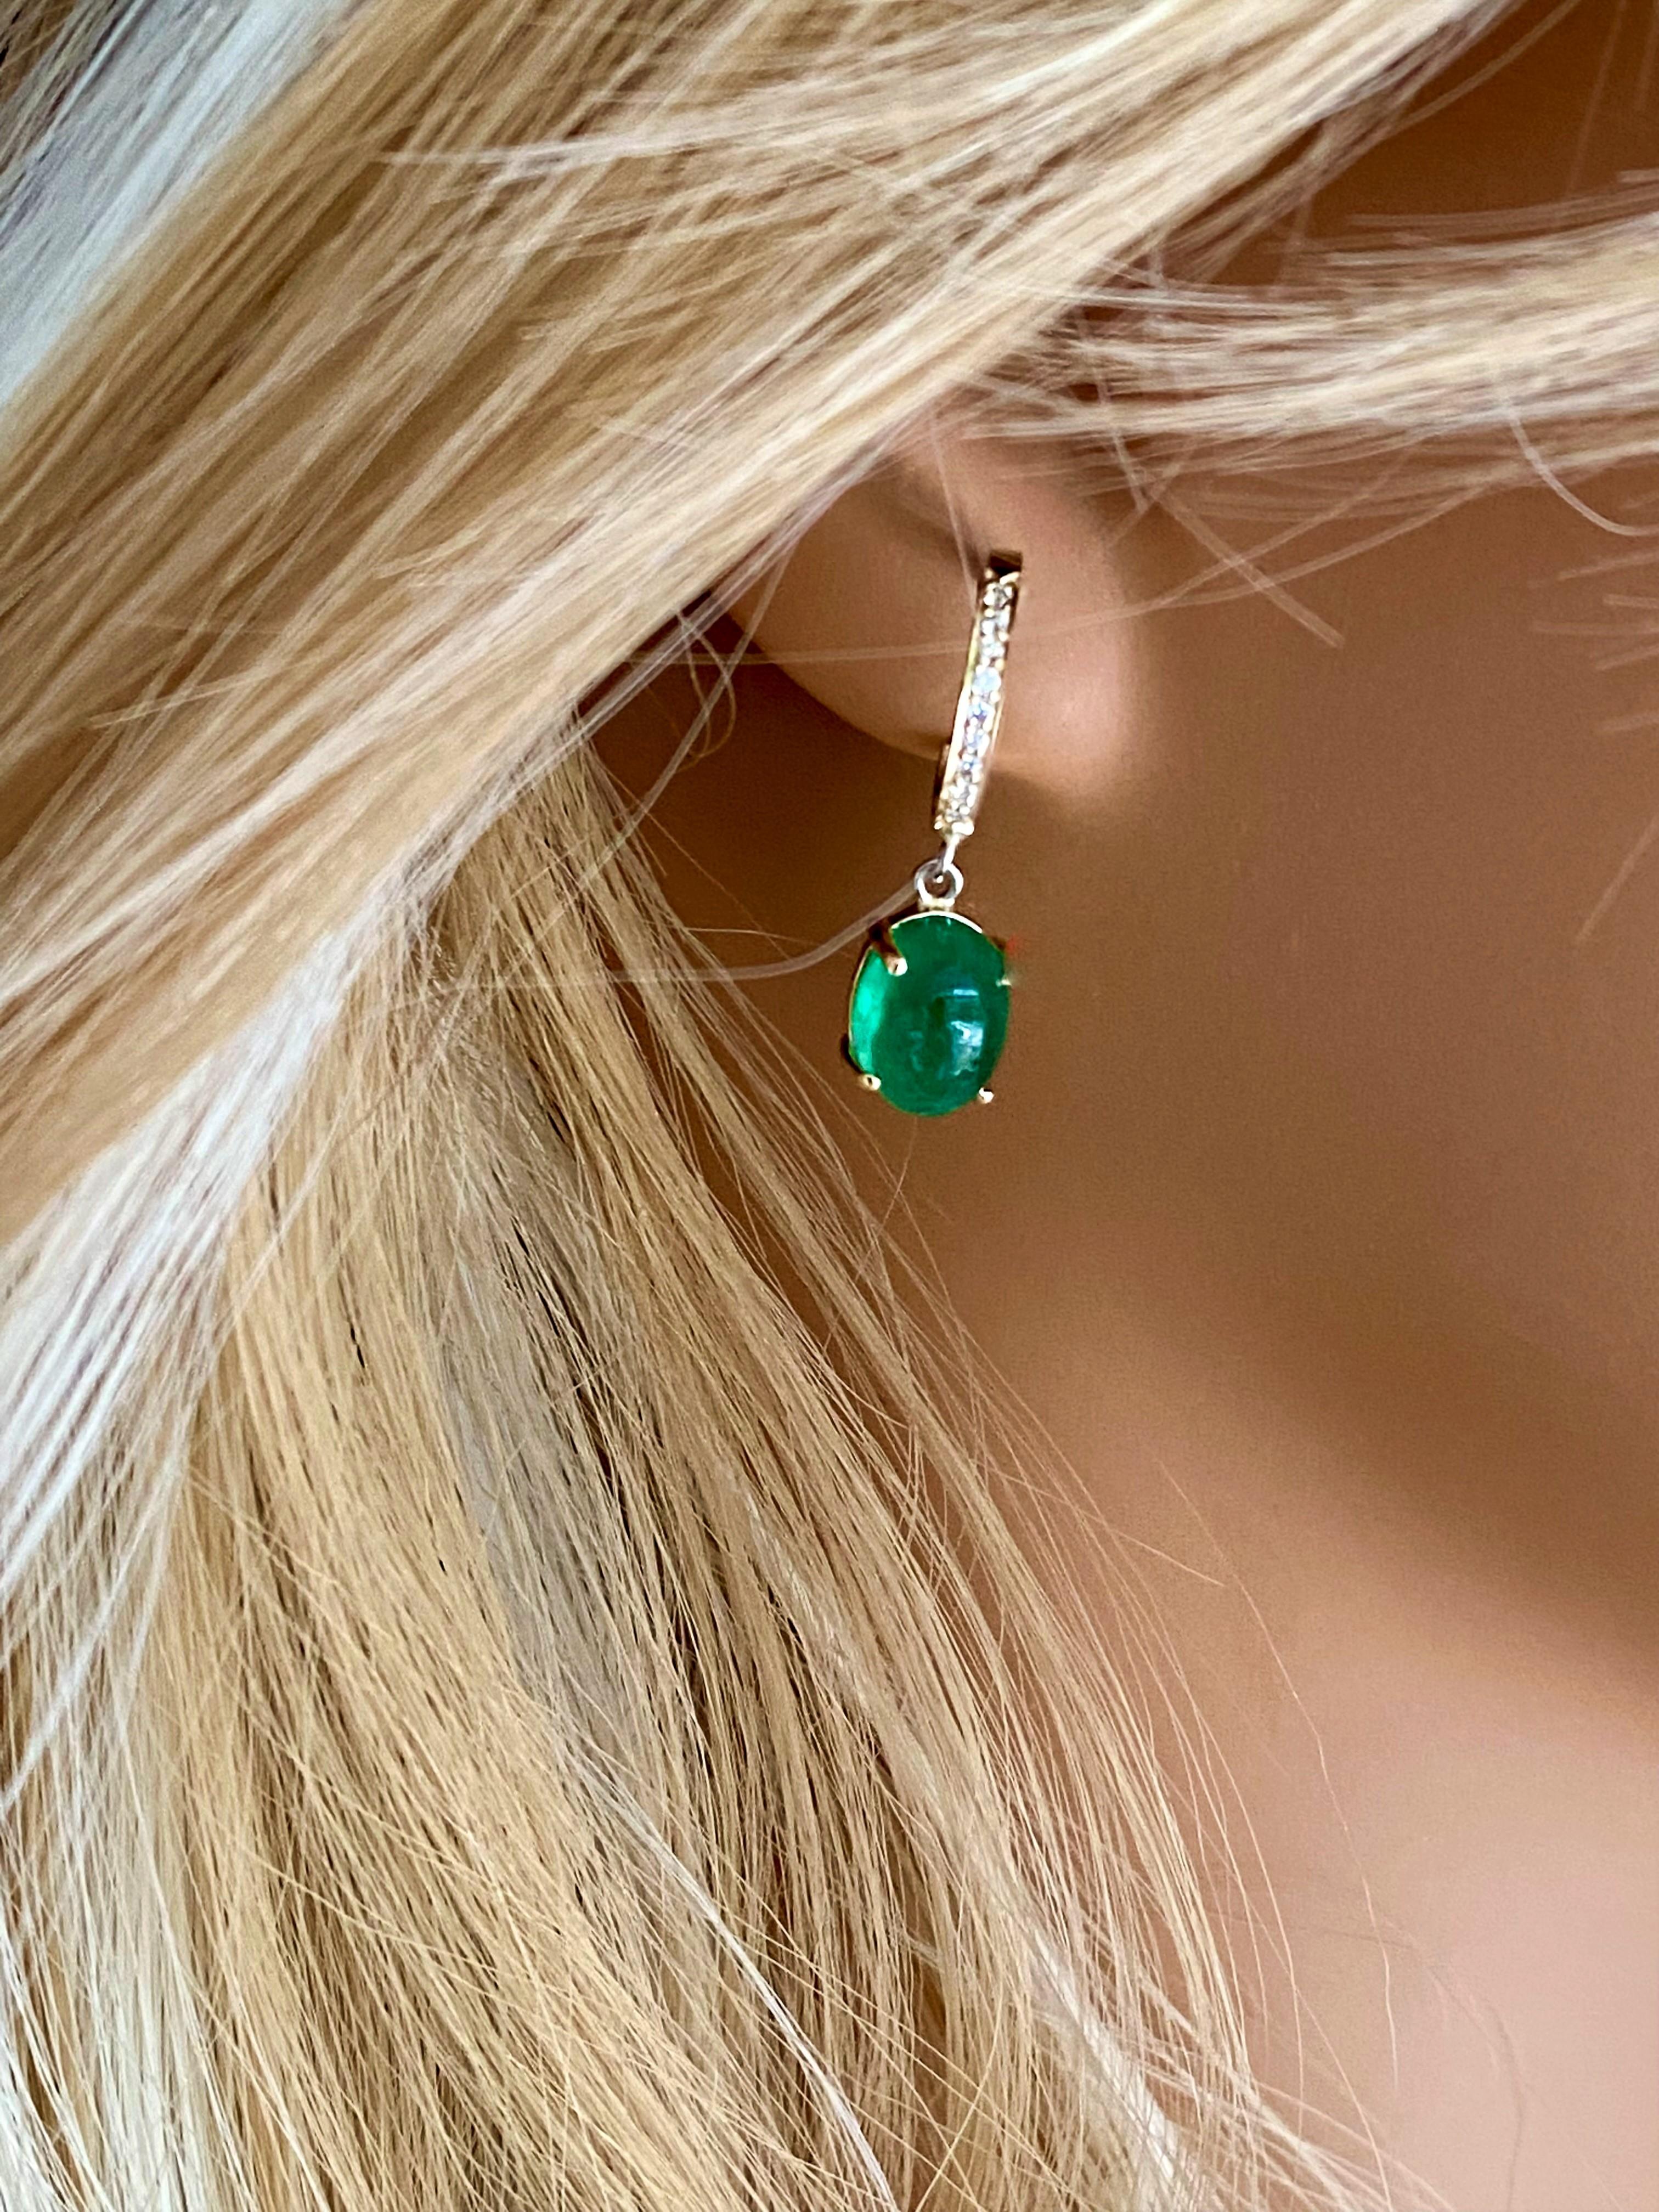 Contemporary Cabochon Emerald Diamond Gold Hoop Earrings Weighing 4.48 Carat